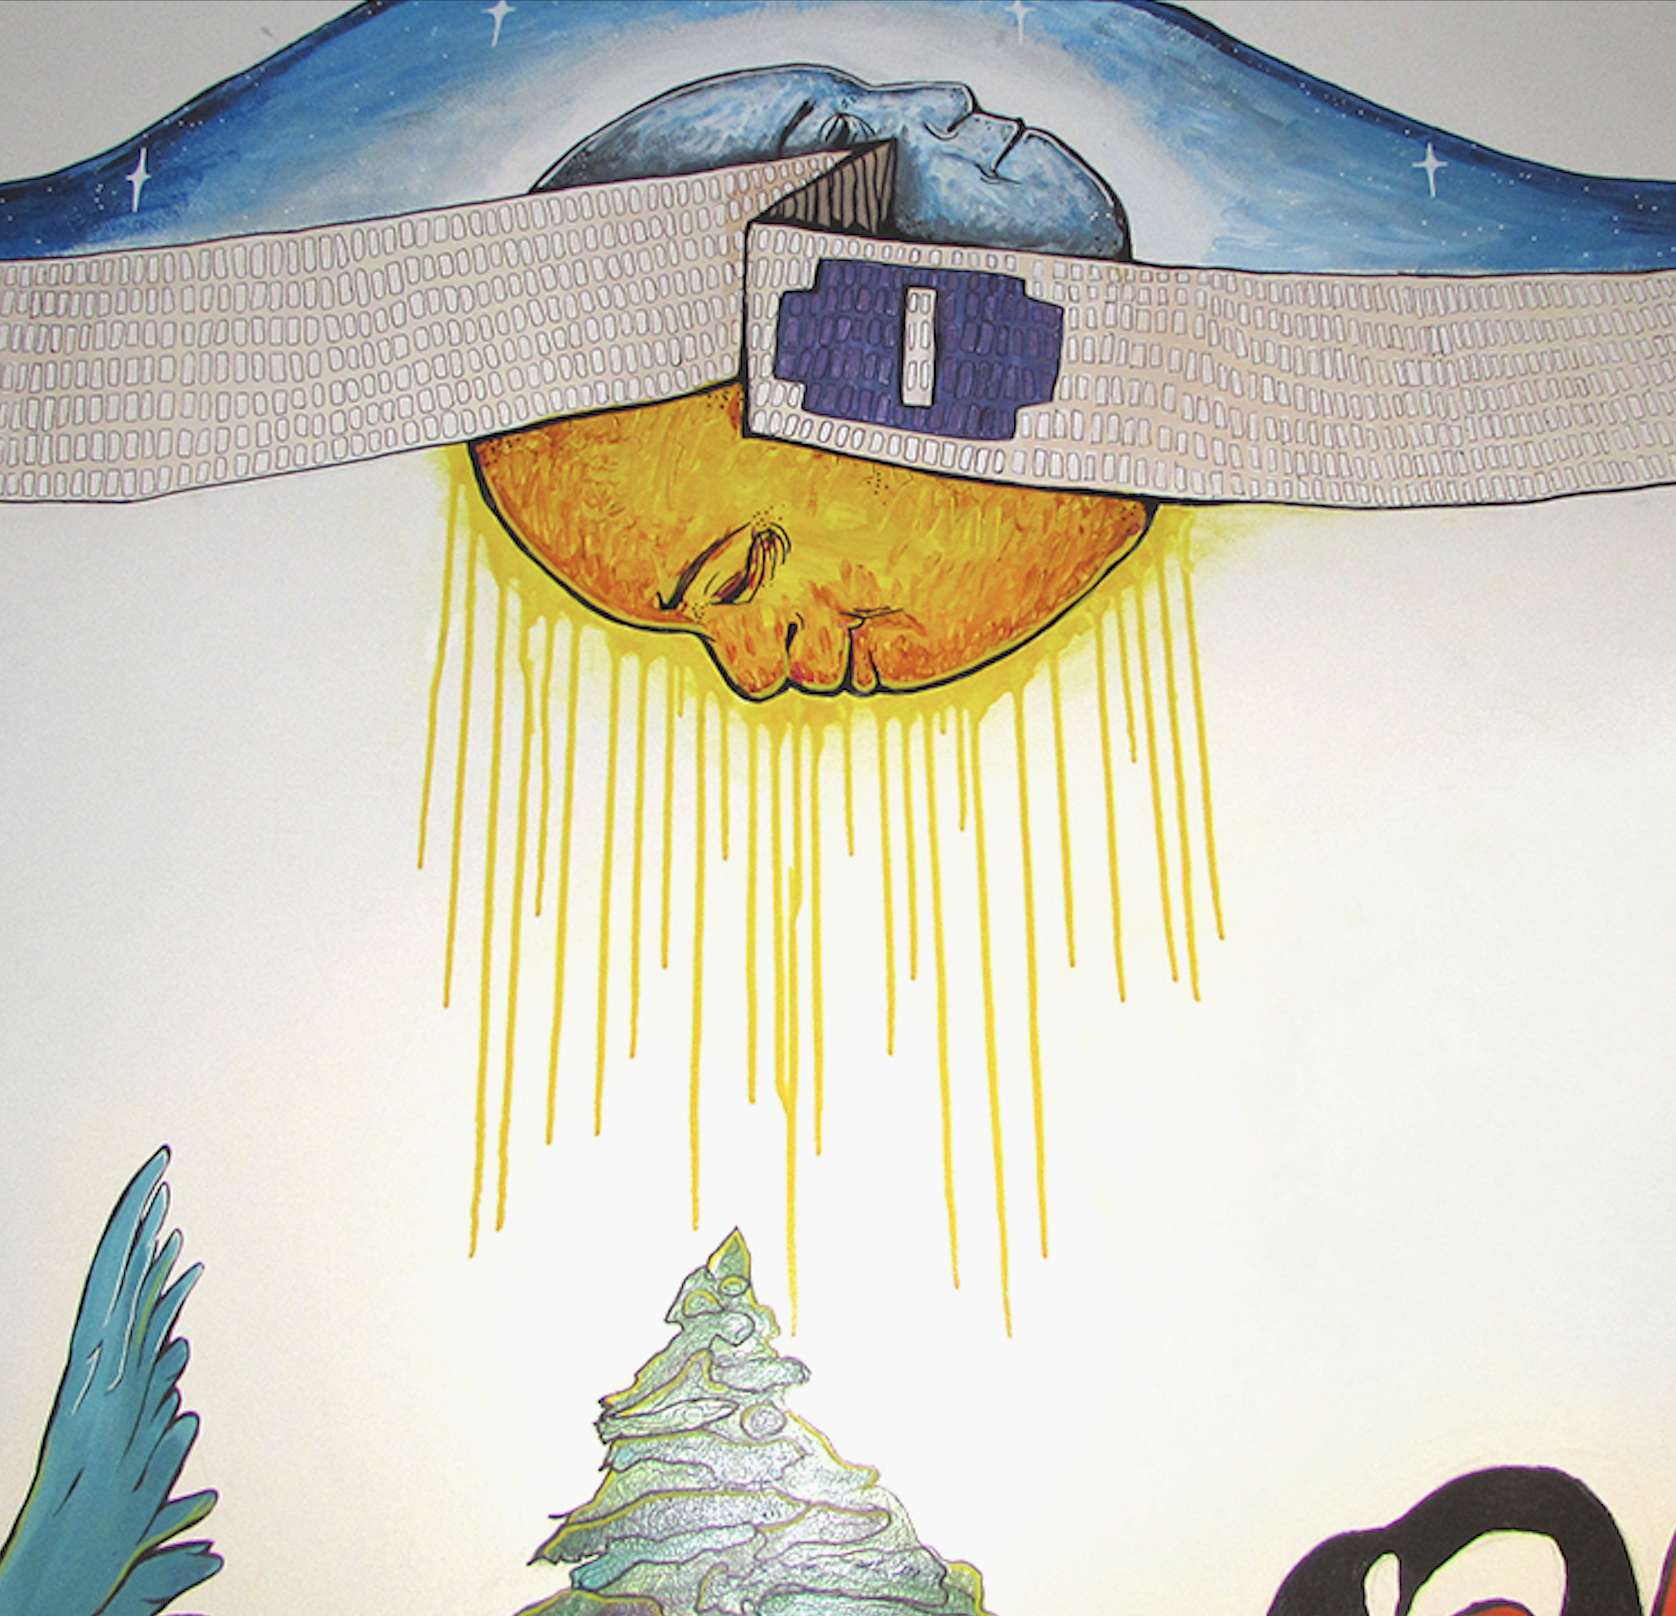 Mural of the "Dish with one Spoon" Wampum belt: a white band with a purple "o" shape in the middle. Above and below the belt are the sun and moon, respectively.